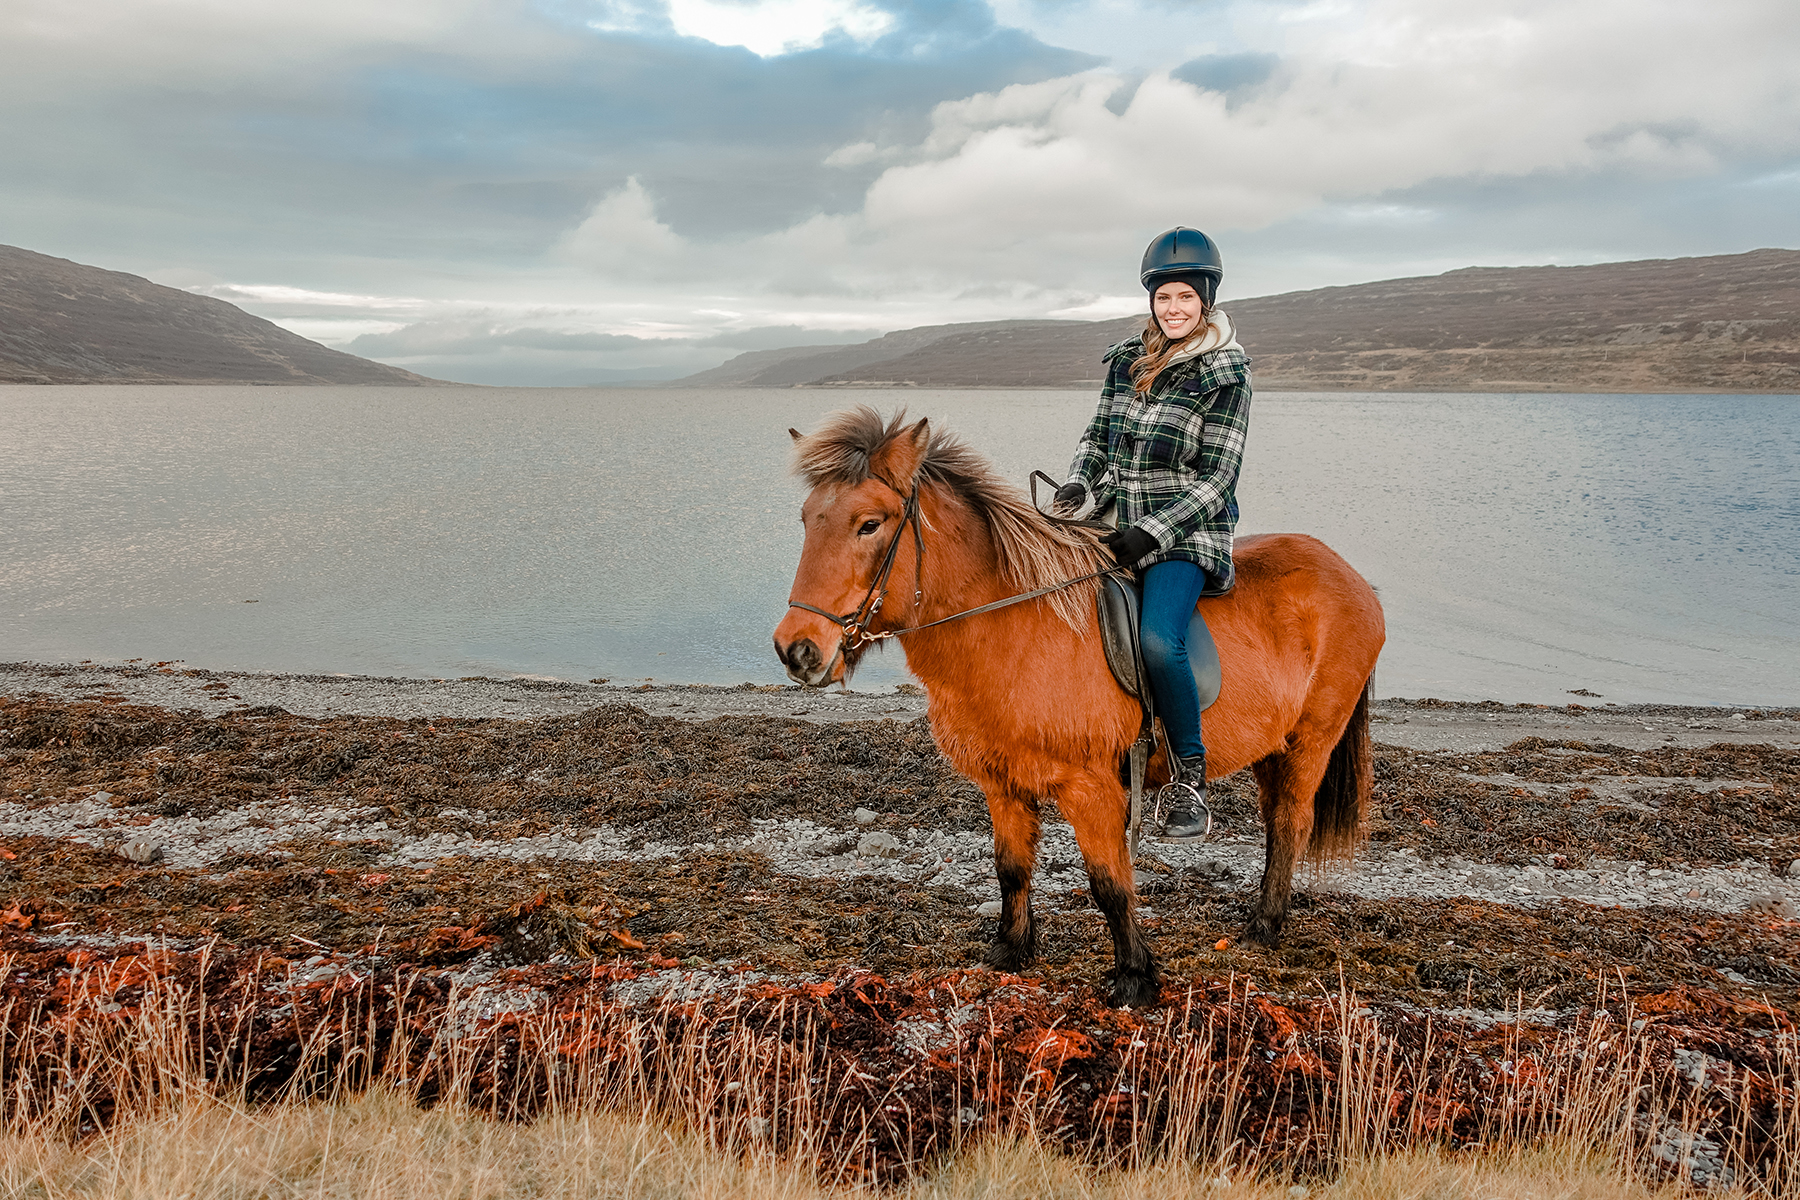 Alyssa Campanella and Torrance Coombs visit Heydalur Guesthouse in Westfjords, Iceland